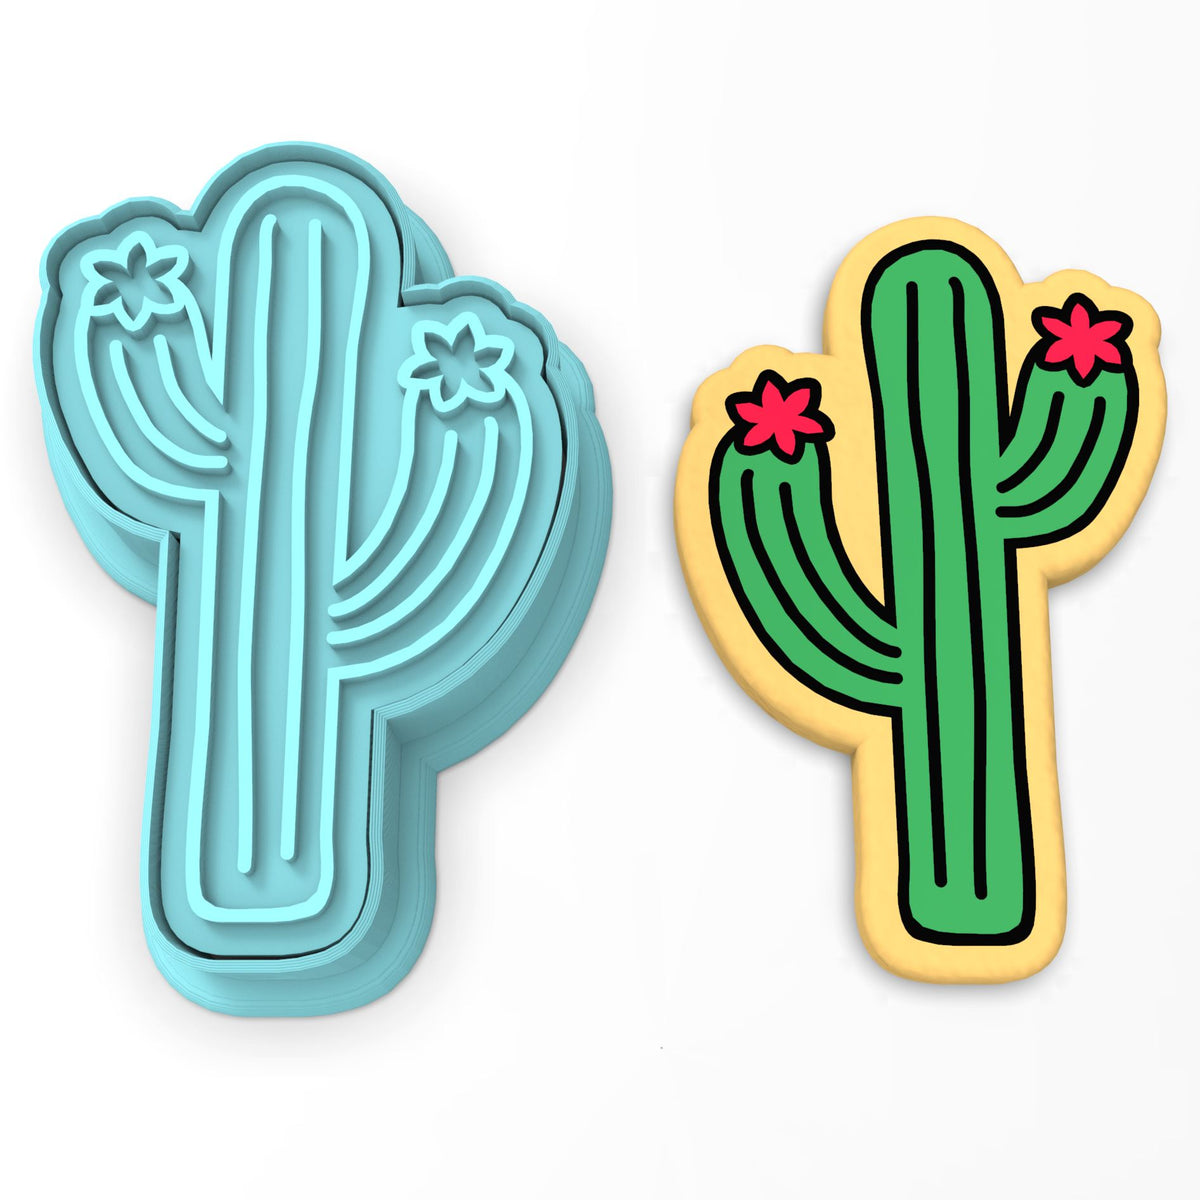 Cactus Fondant Cookie Cutter and Stamp #1385 